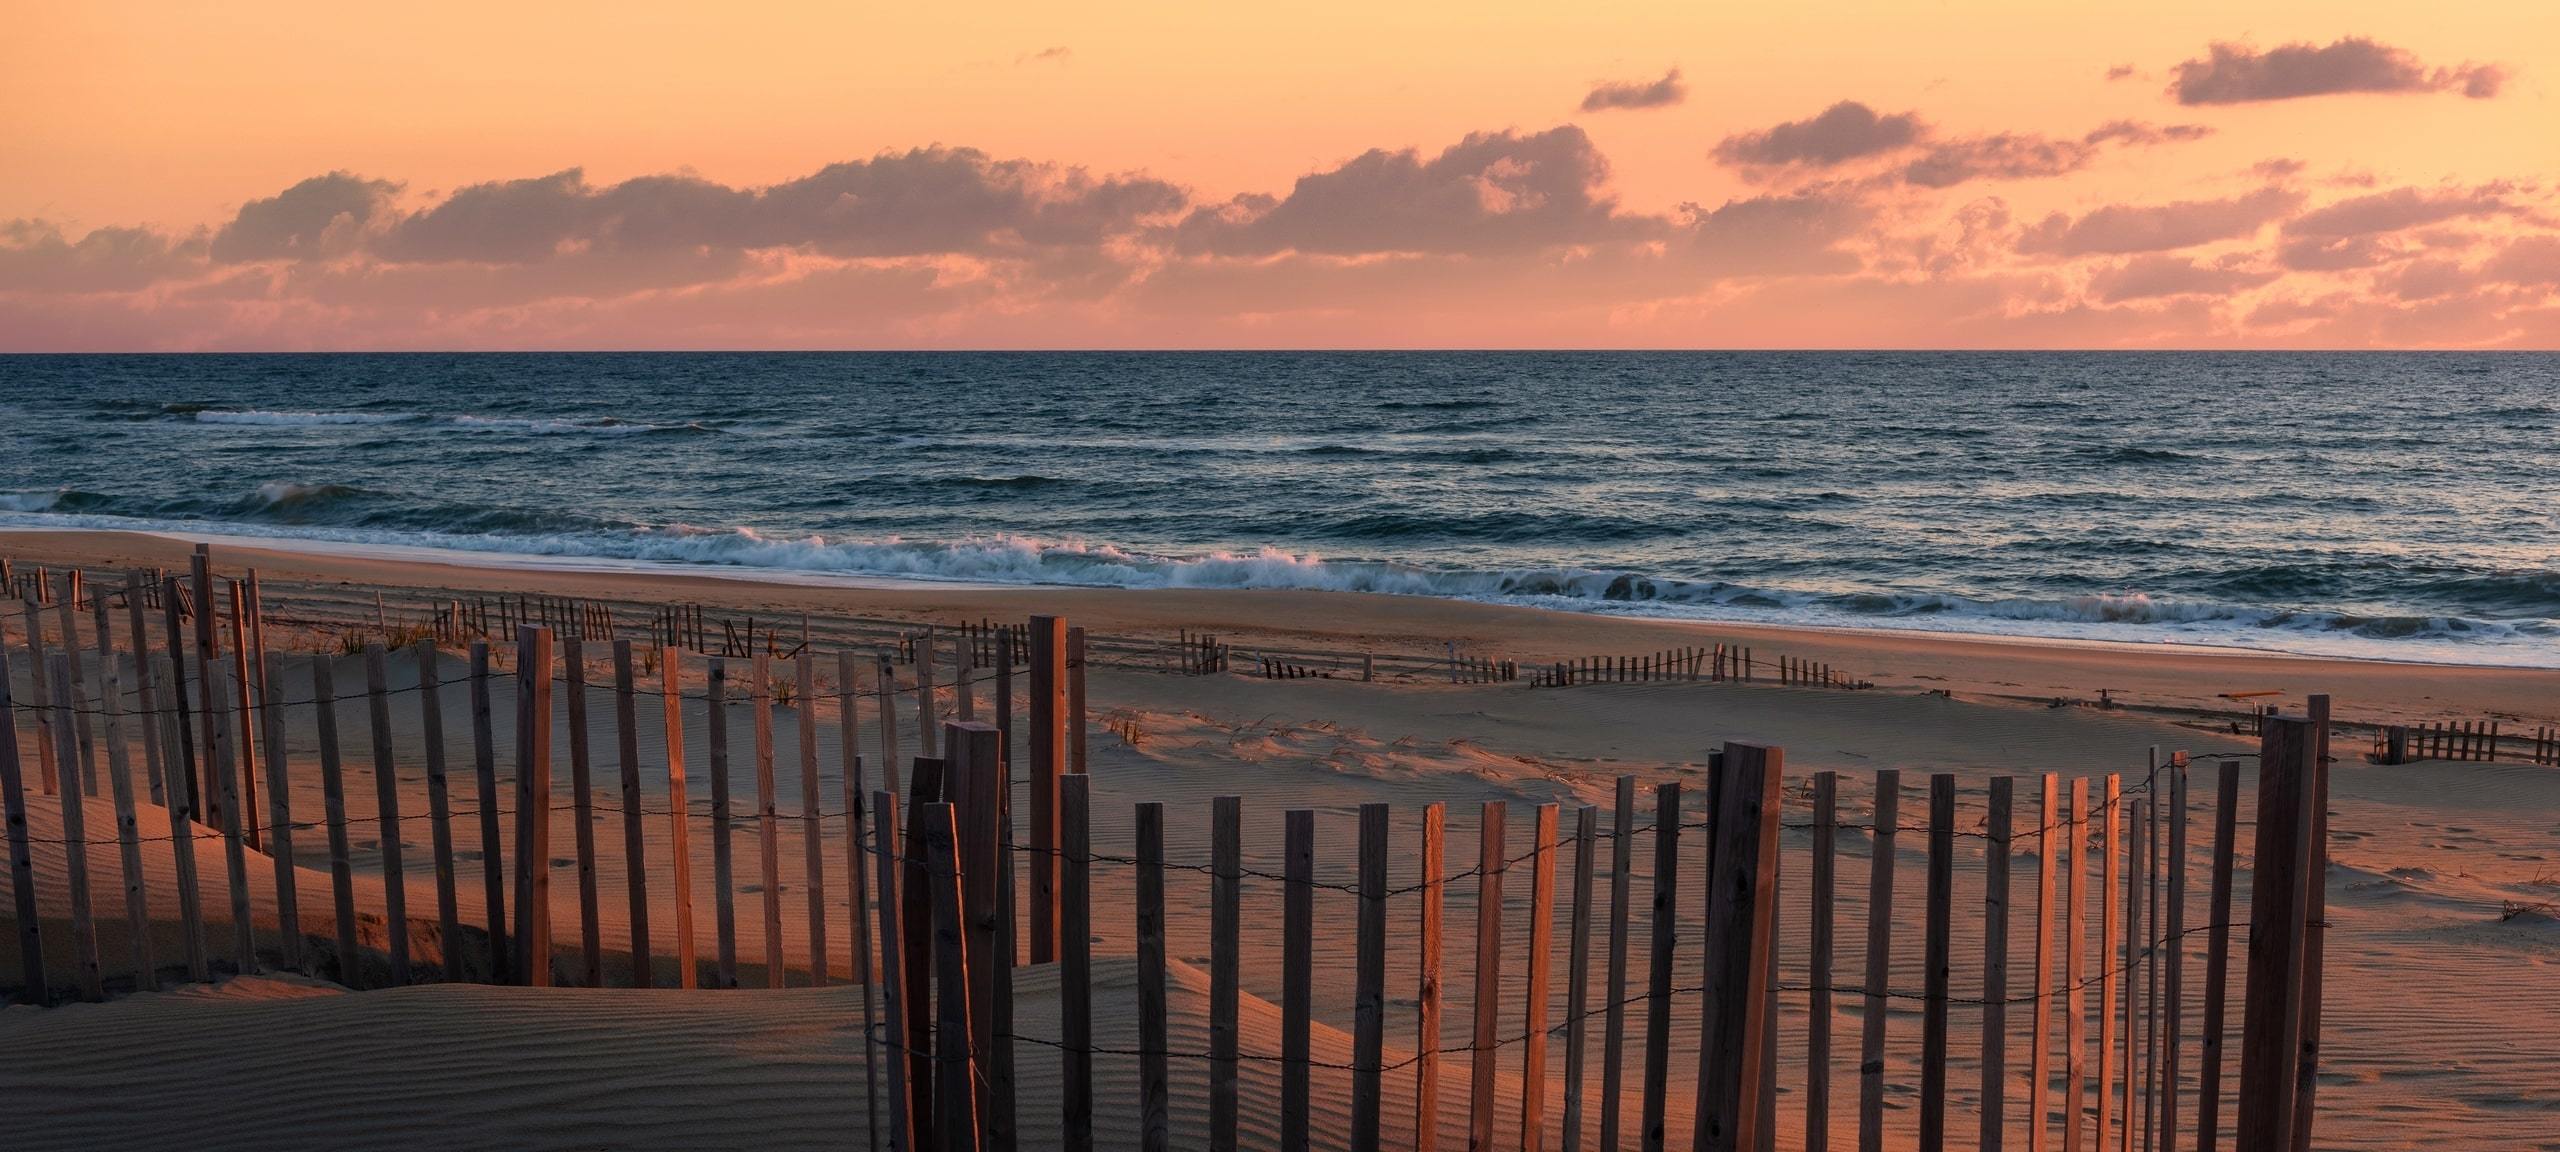 Sand dunes and beach during sunrise, Avon-By-The-Sea, NJ